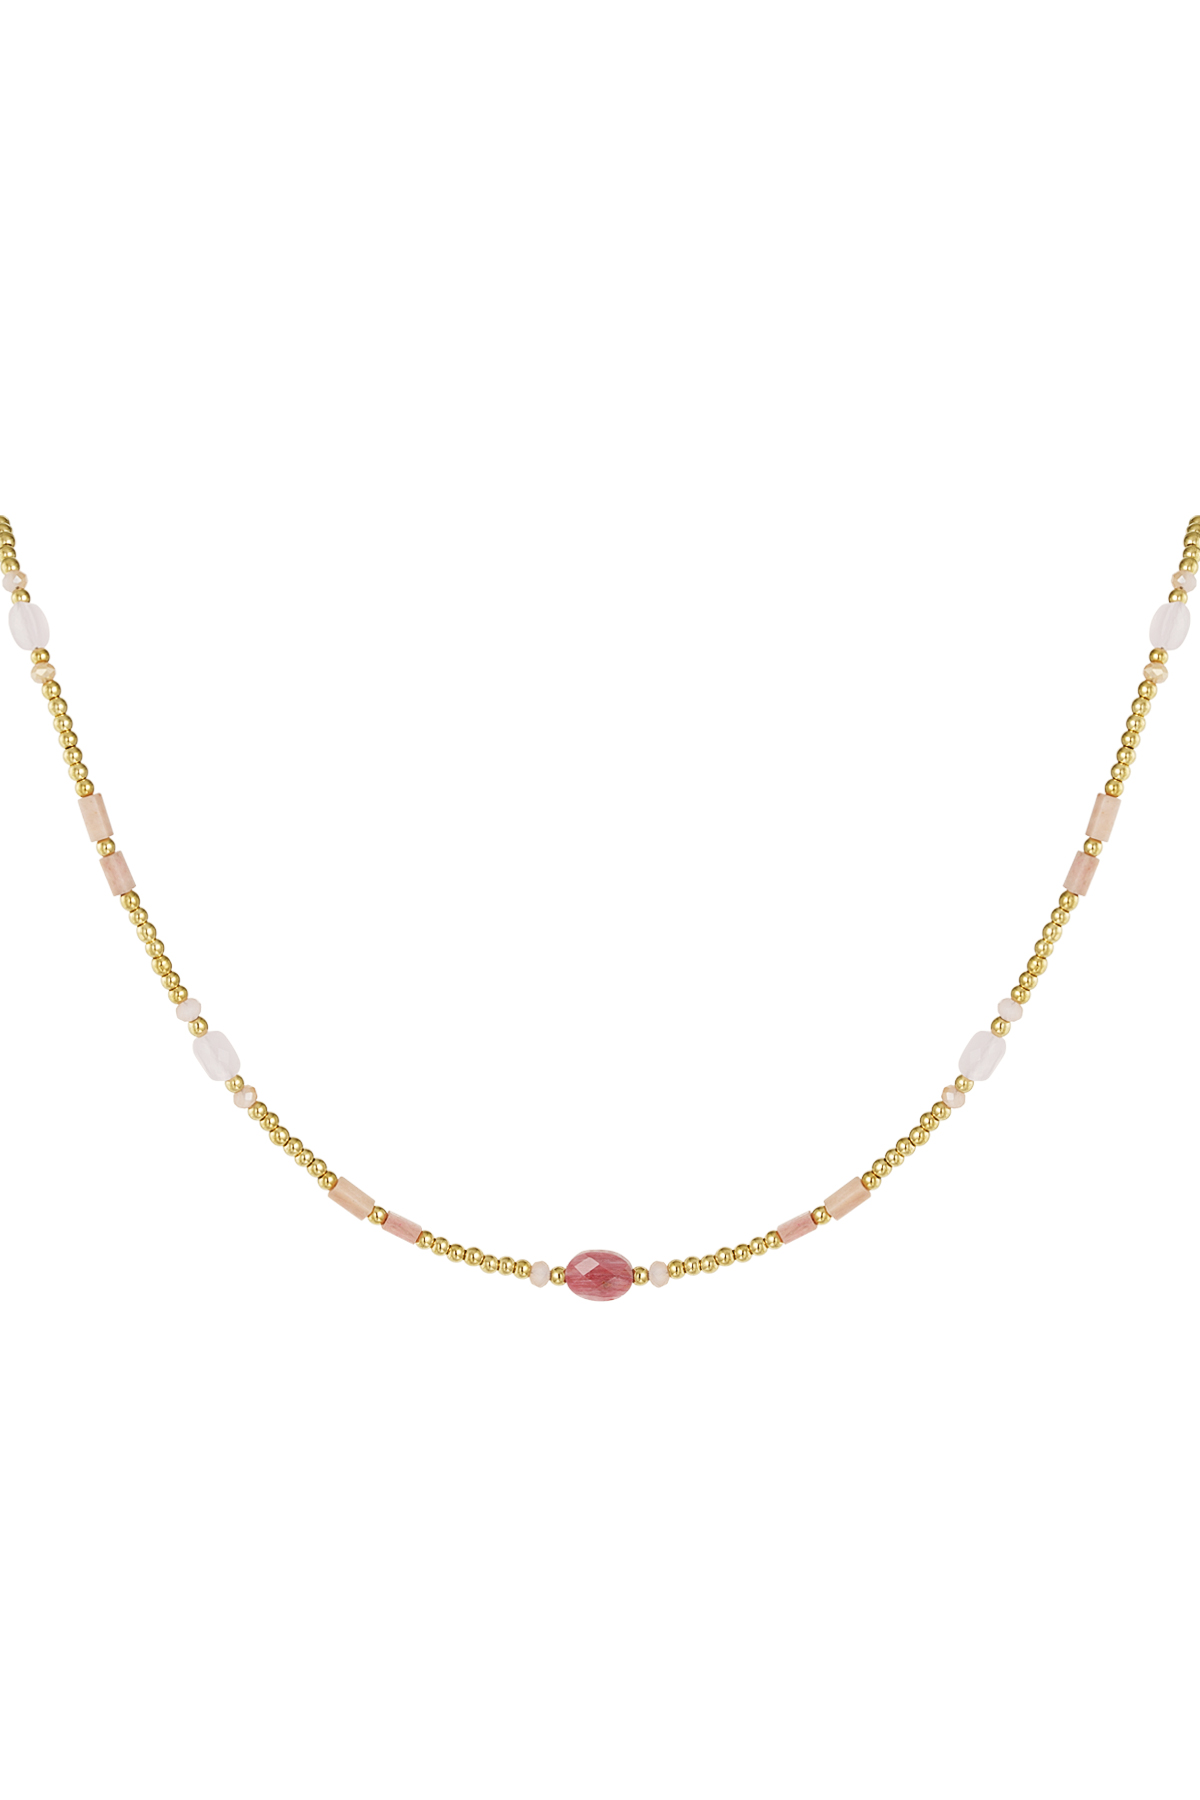 Beaded necklace colorful details - pink & gold Stainless Steel 